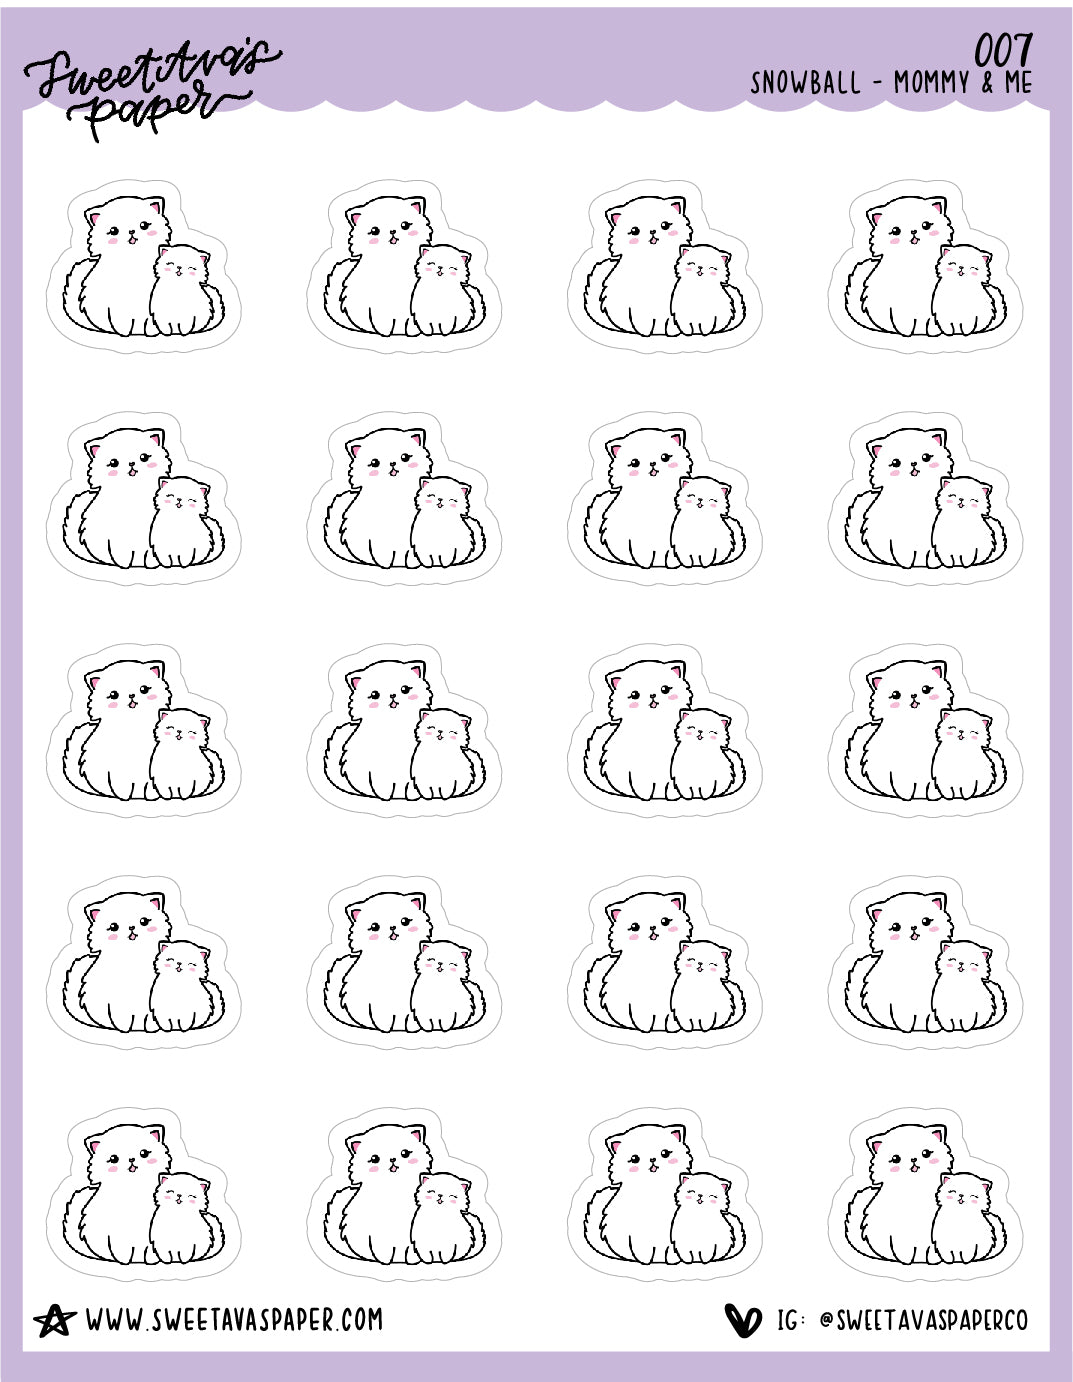 Mommy And Me Stickers - Snowball The Cat - [007]